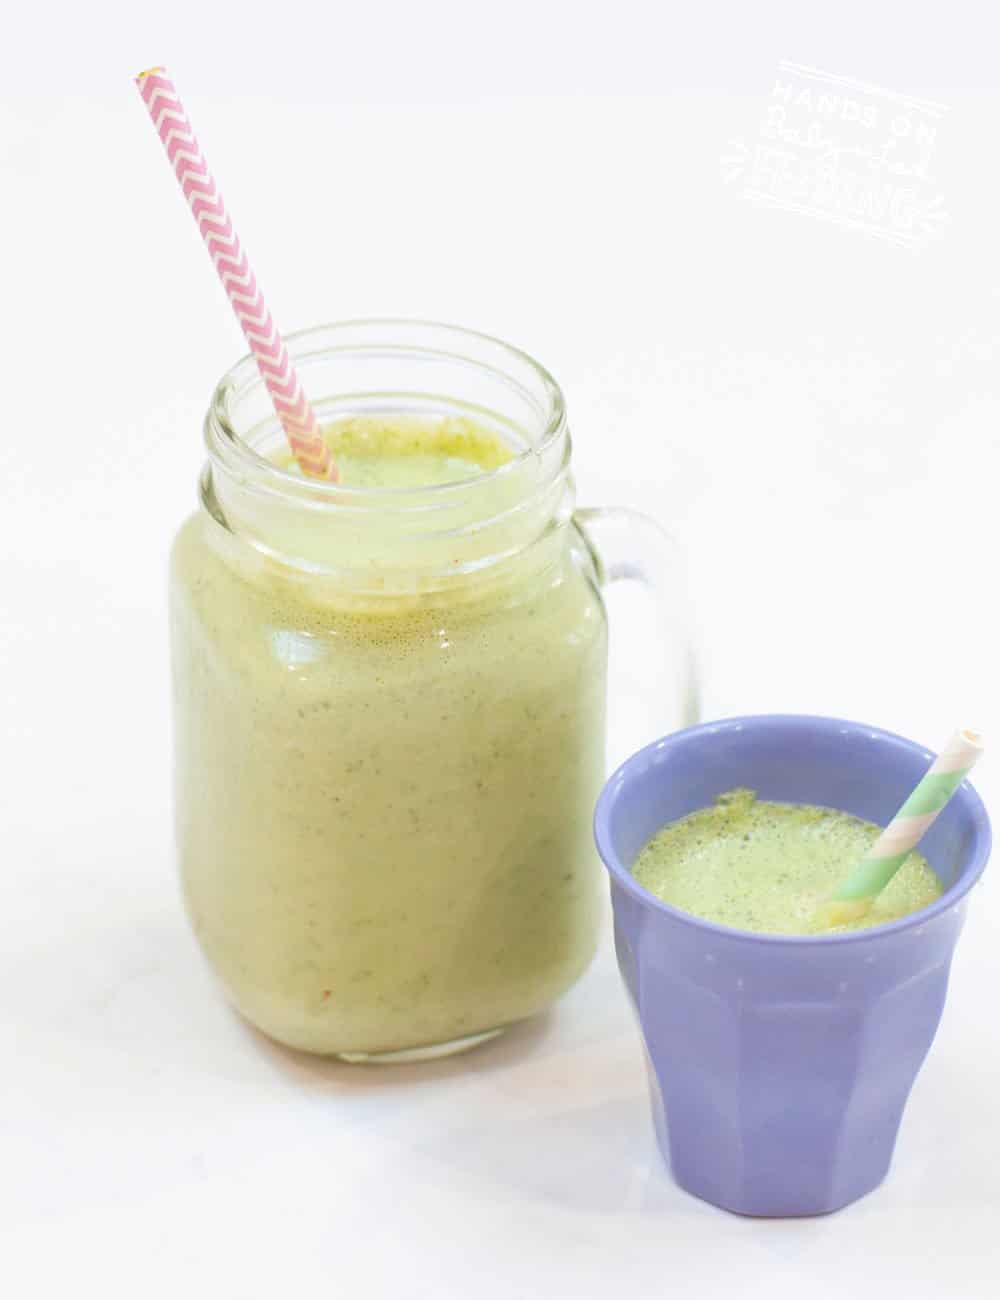 Kale and Pineapple Smoothie has just 5 ingredients and is full of healthy veggies, sweet pineapple, and tangy lime! This easy smoothie makes a quick breakfast or easy snack and is an excellent way to hide veggies from your picky eater! #smoothierecipe #pineapple #pickyeater #babyledweaning